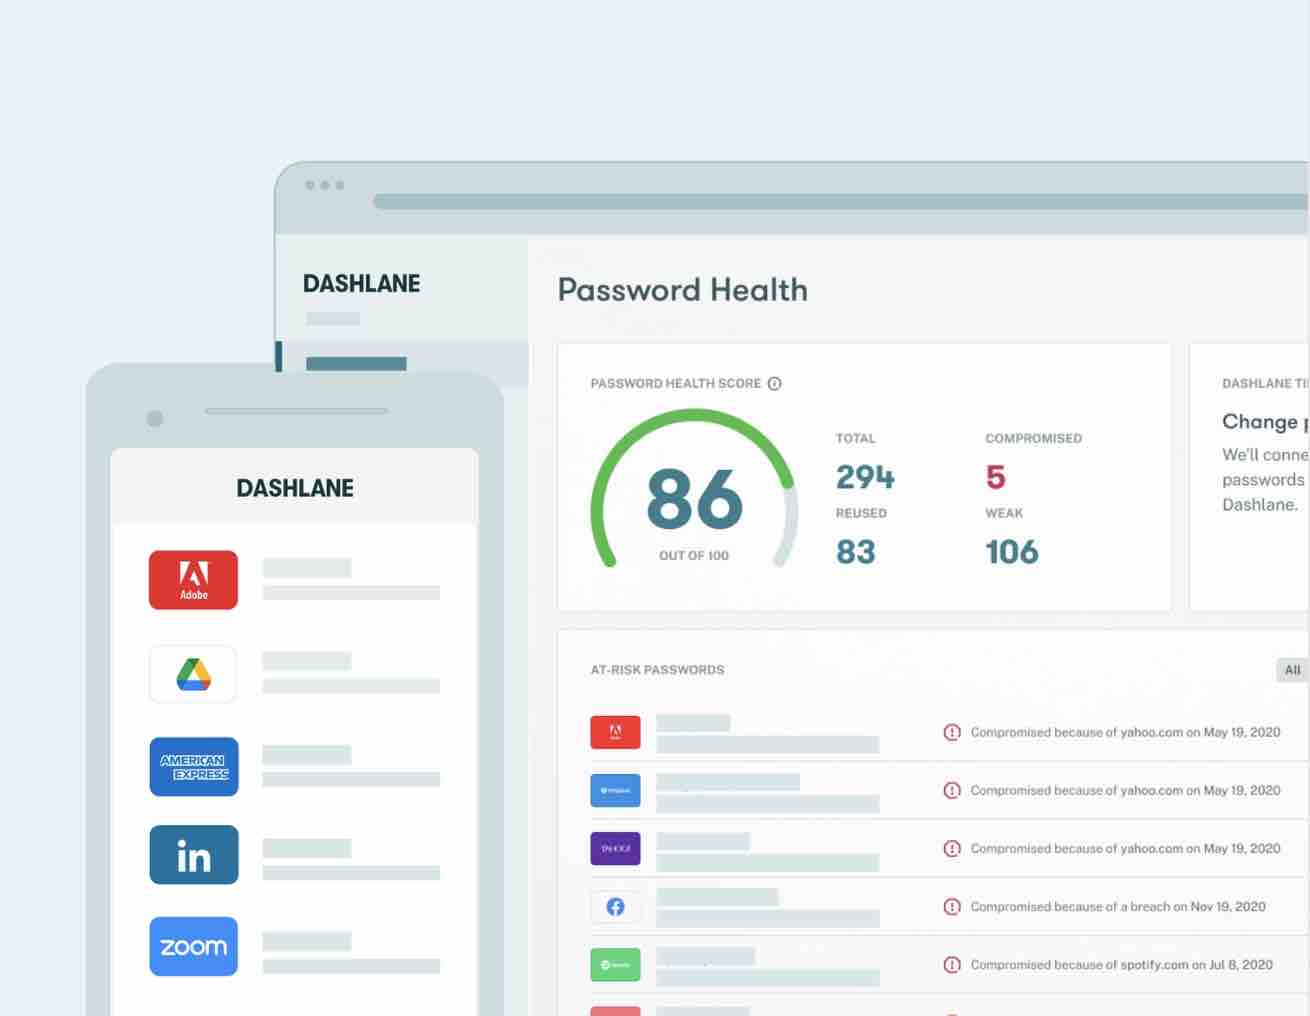 Dashlane allows you to generate and store strong passwords.